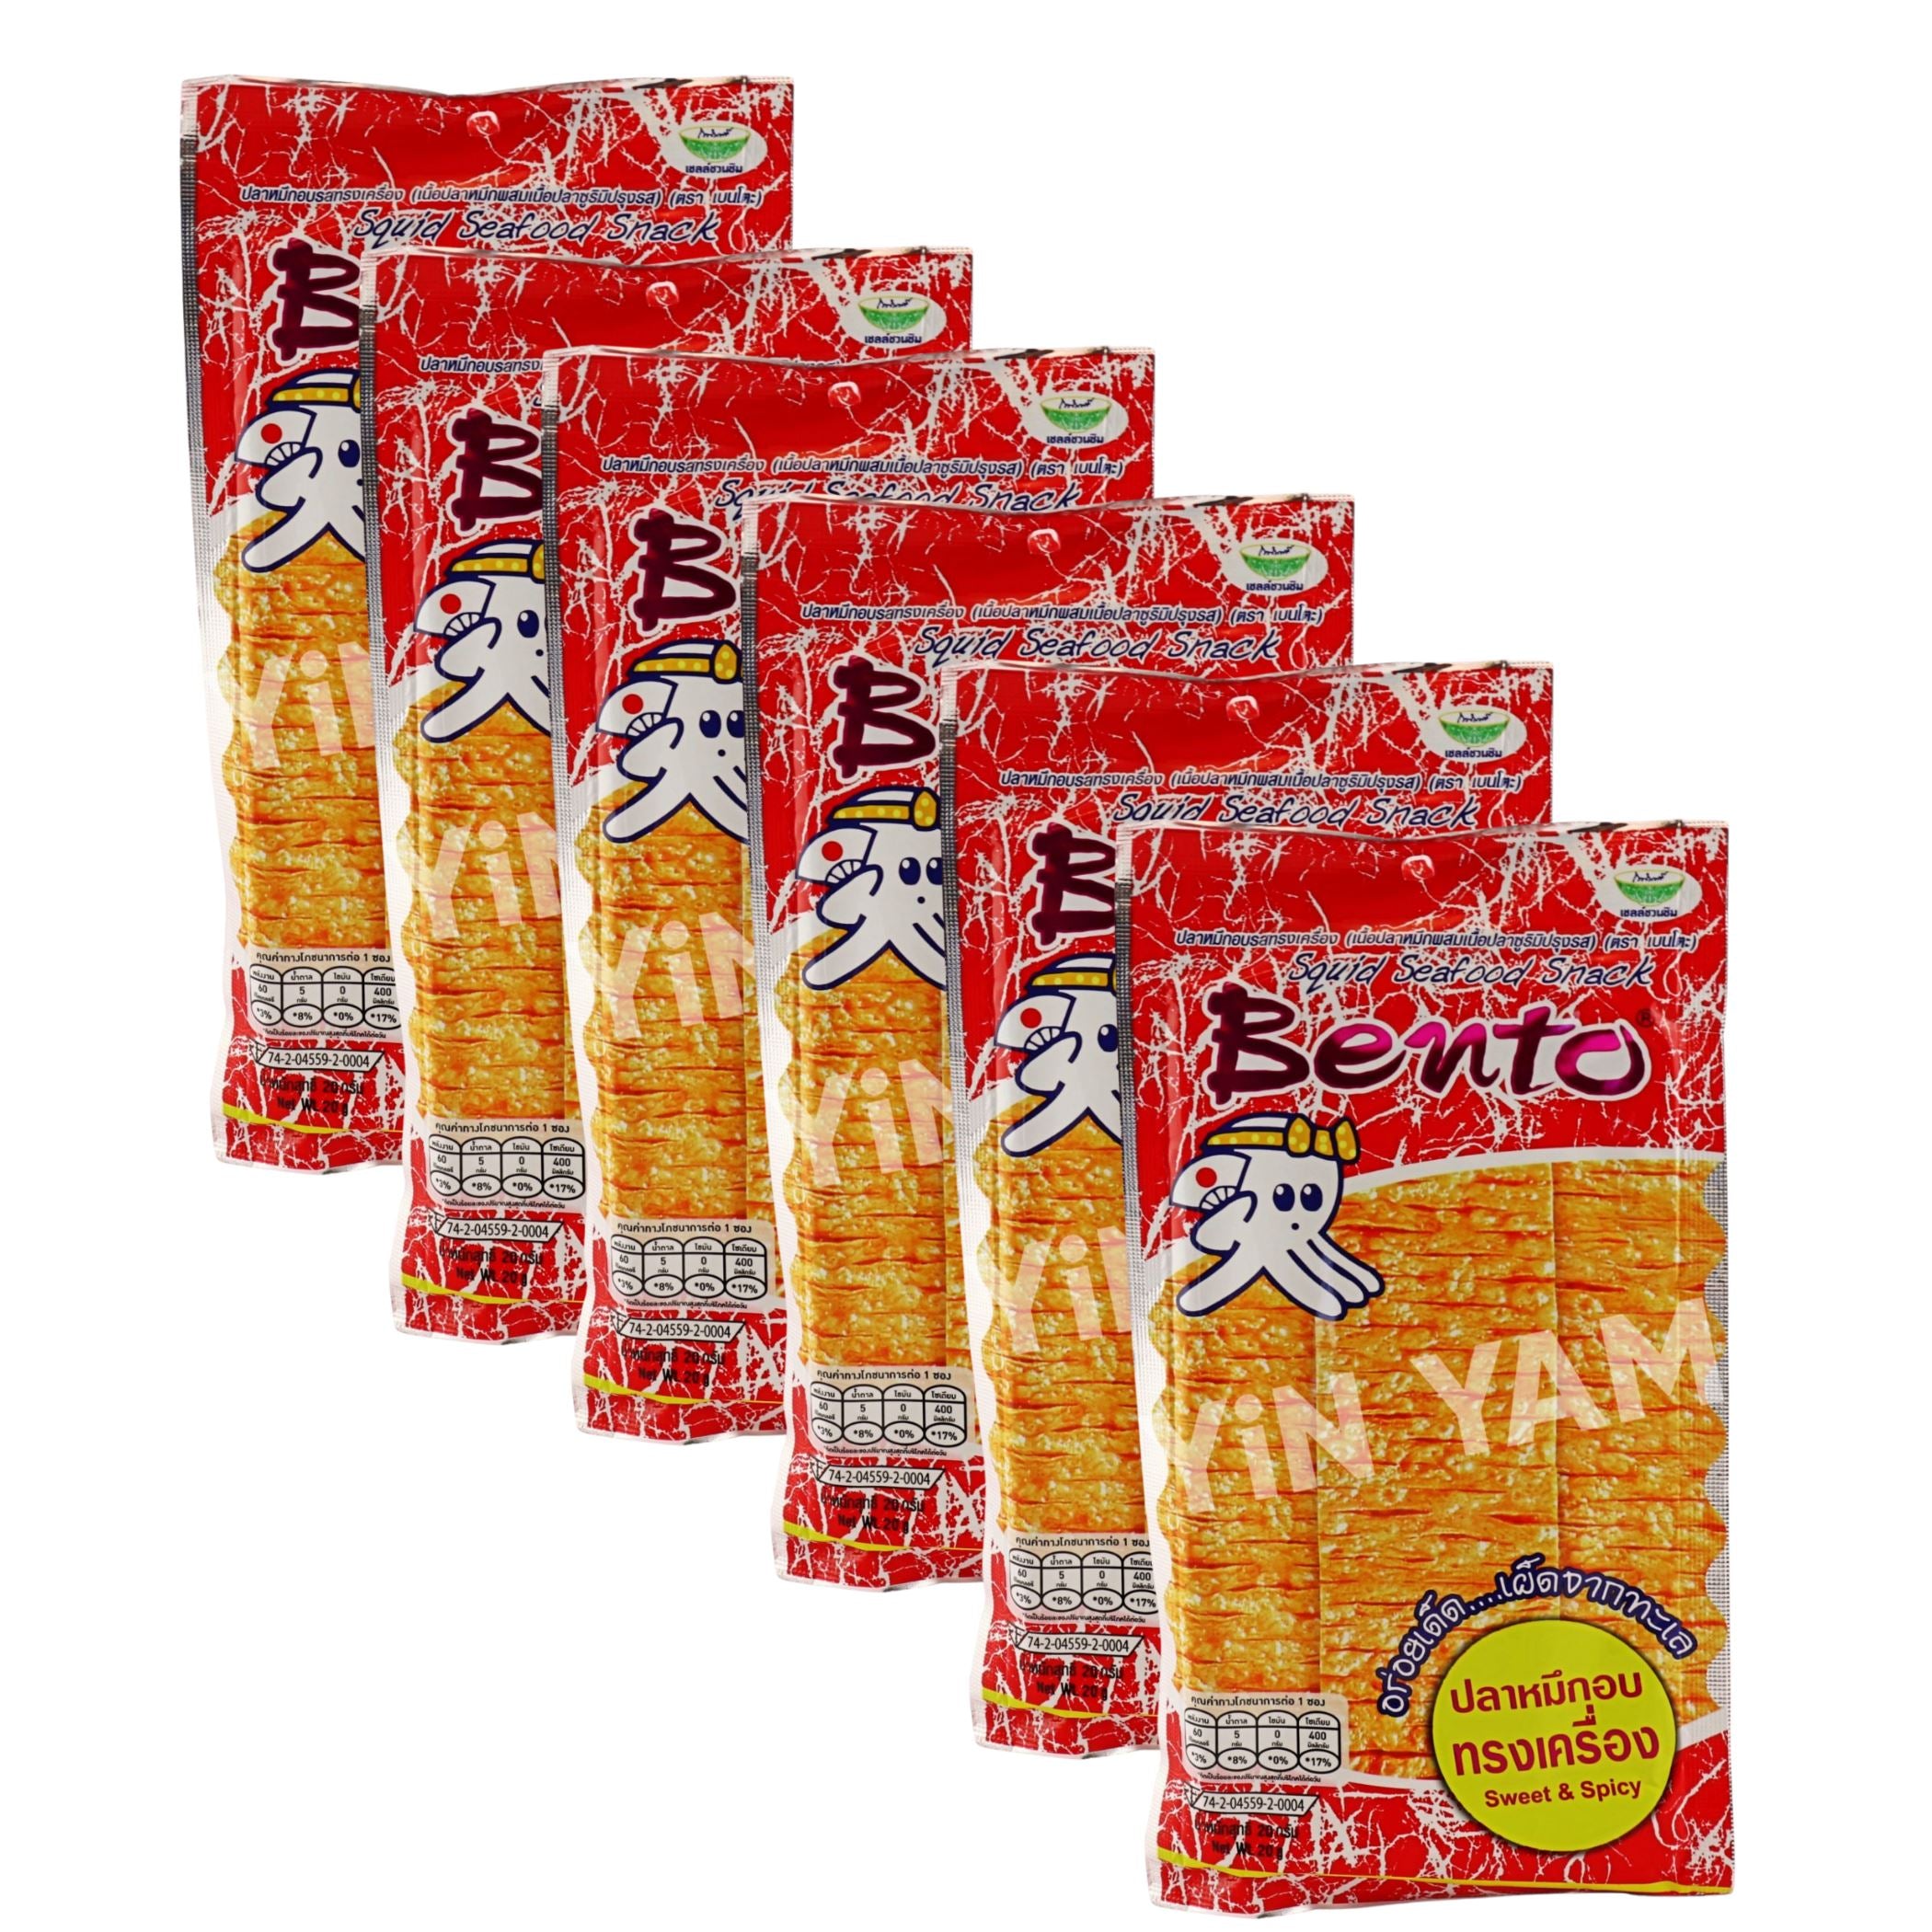 https://cdn.shopify.com/s/files/1/0090/2742/0196/products/yin_yam_bento_squid_snack_sweet___spicy_red_20g_pack_of_6.jpg?v=1605140365